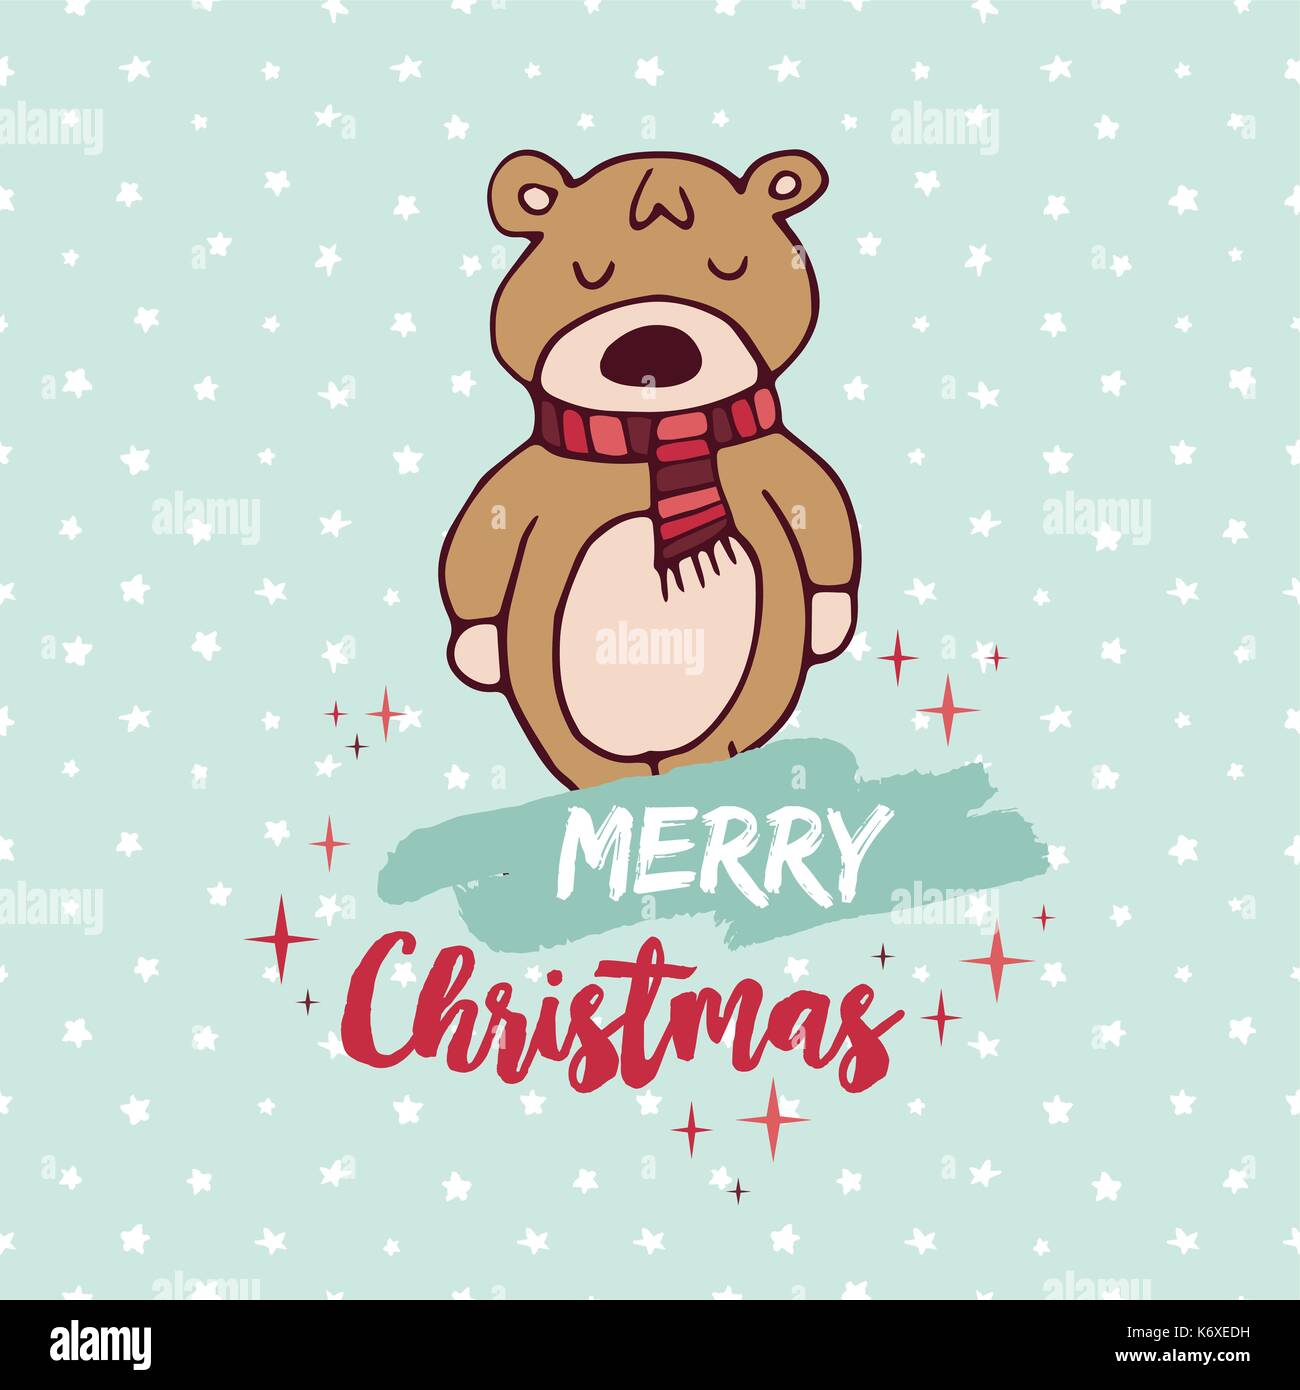 Merry Christmas hand drawn baby bear greeting card illustration. Cute animal cartoon with scarf and handwritten holiday typography quote. EPS10 vector Stock Vector